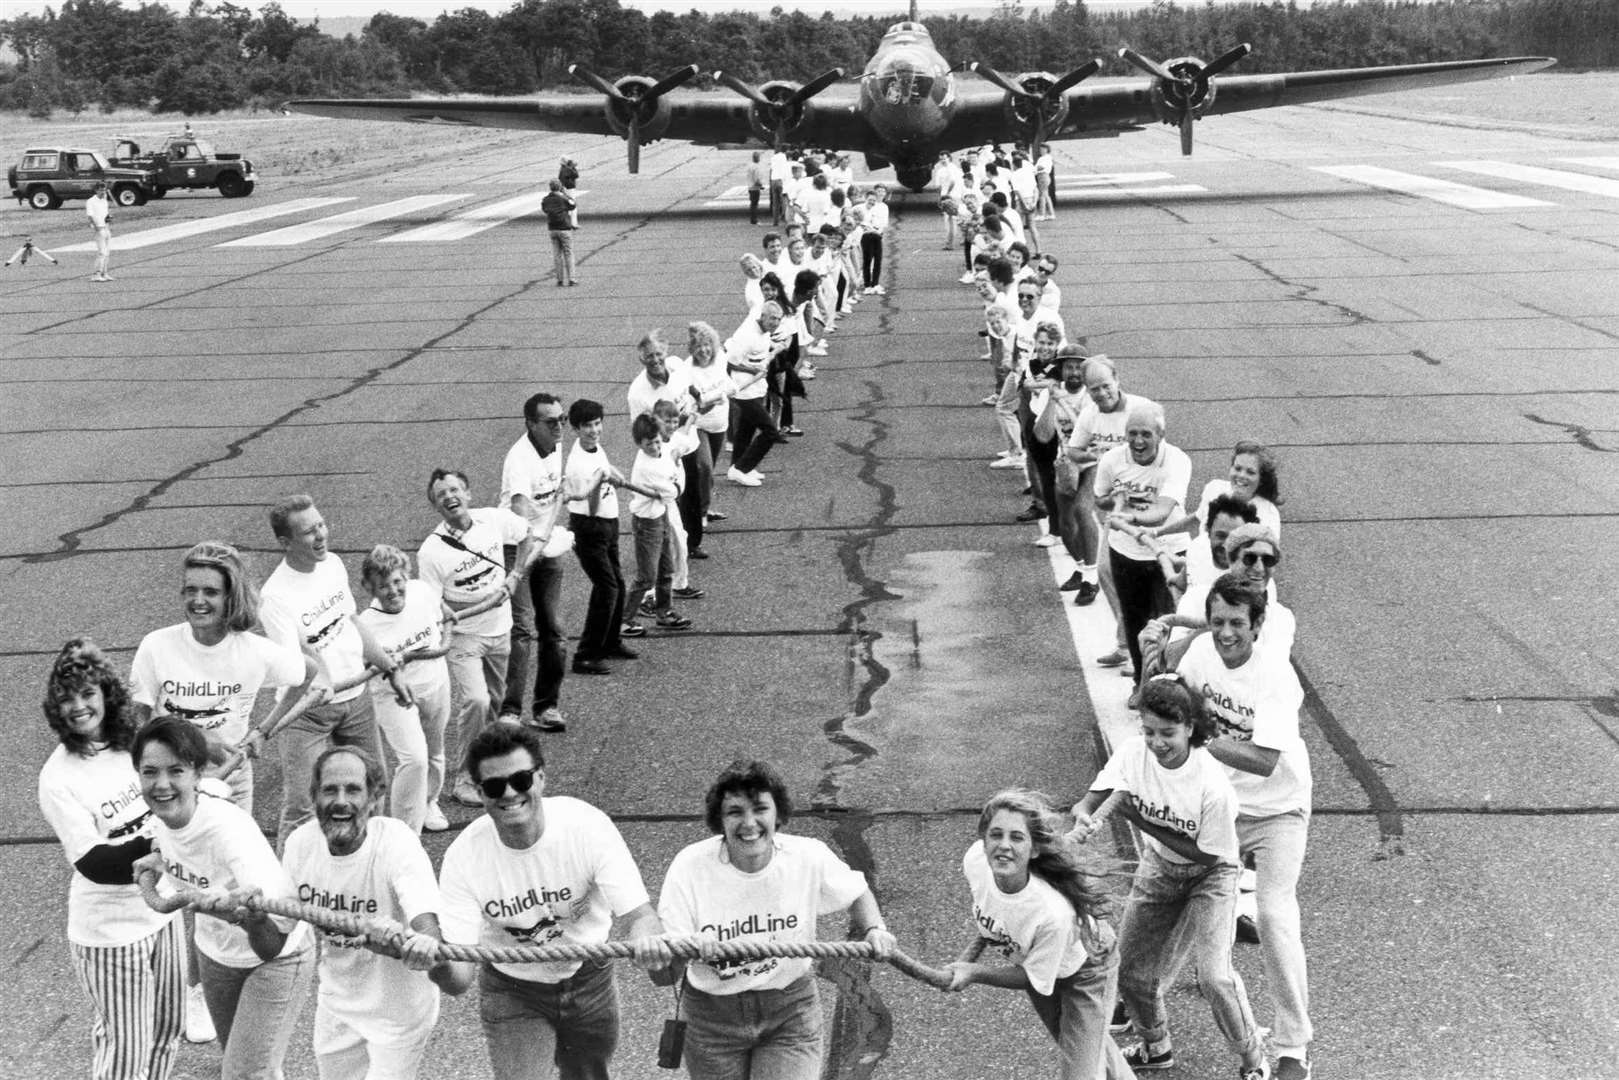 The charity plane pull in 1989 - ‘it was great fun and for a fantastic cause’